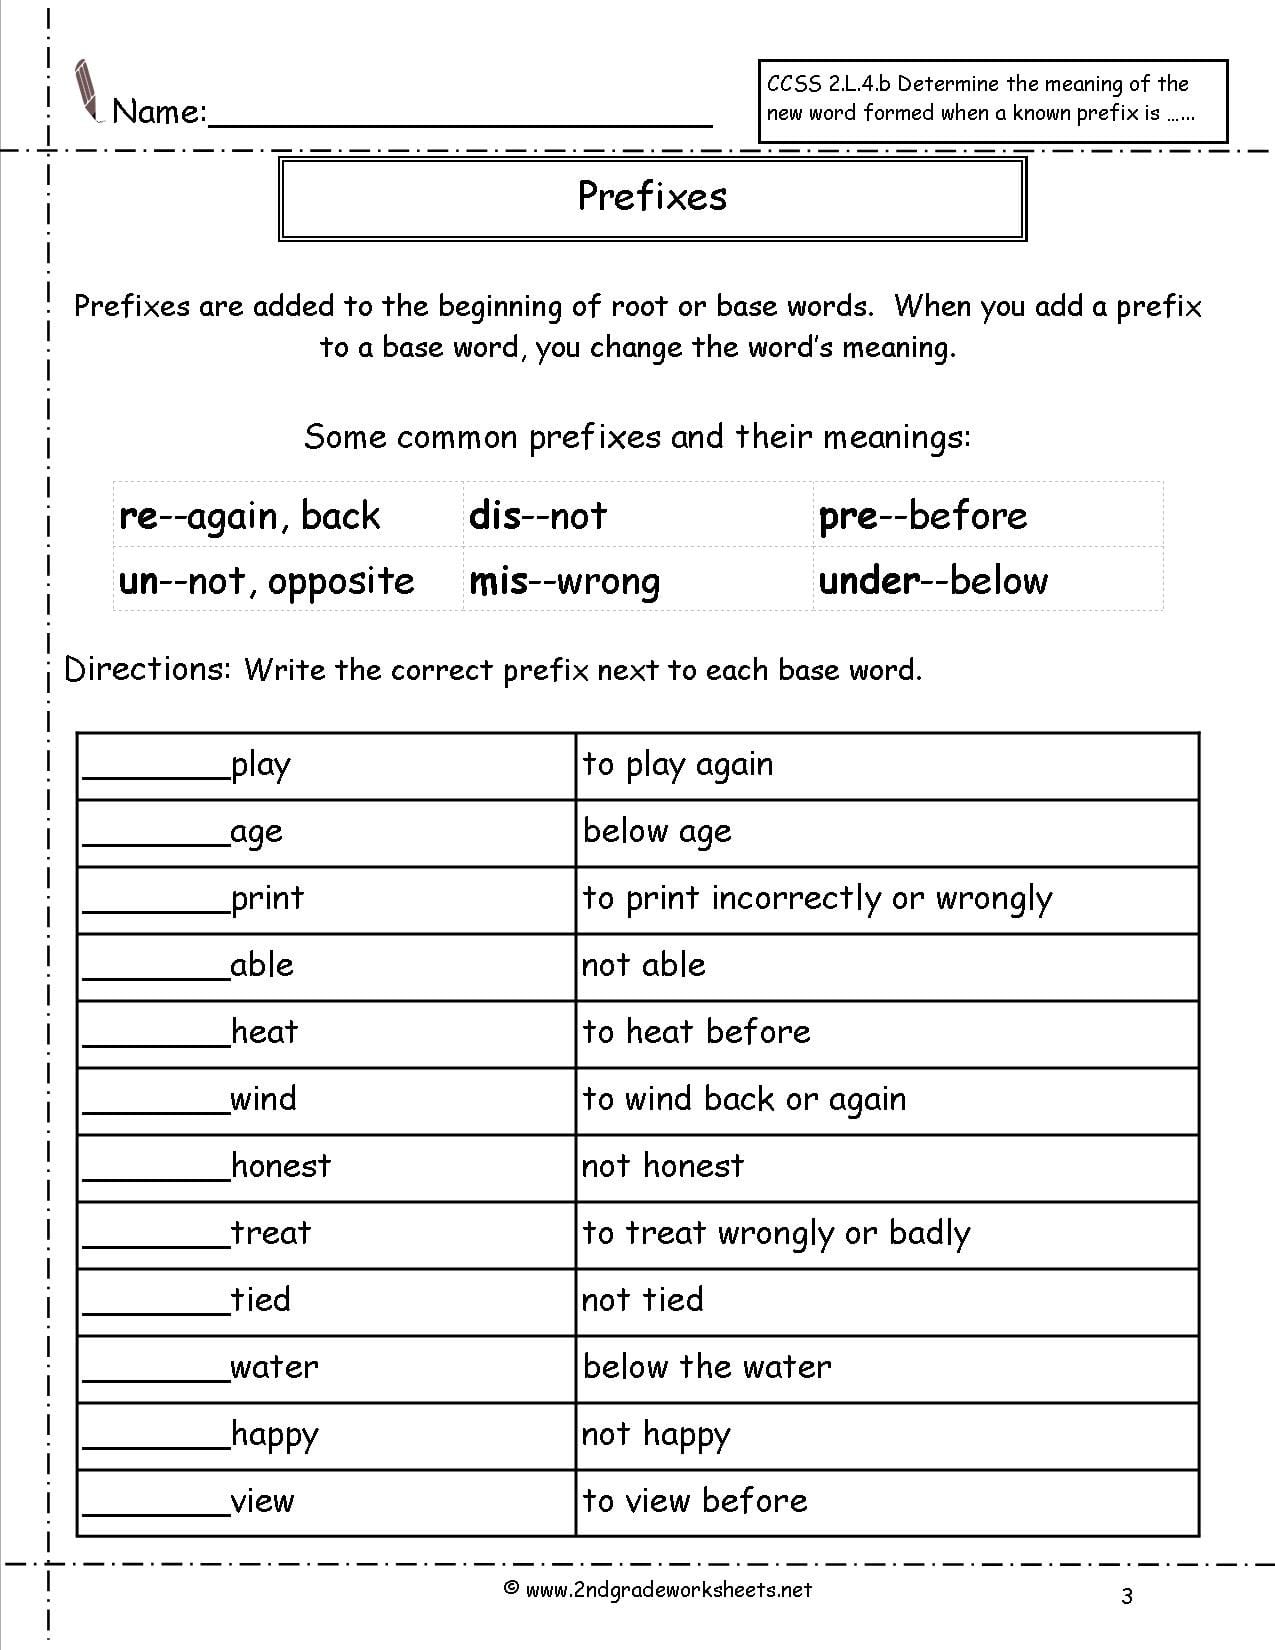 Free Printable Suffixes And Prefixes Worksheets